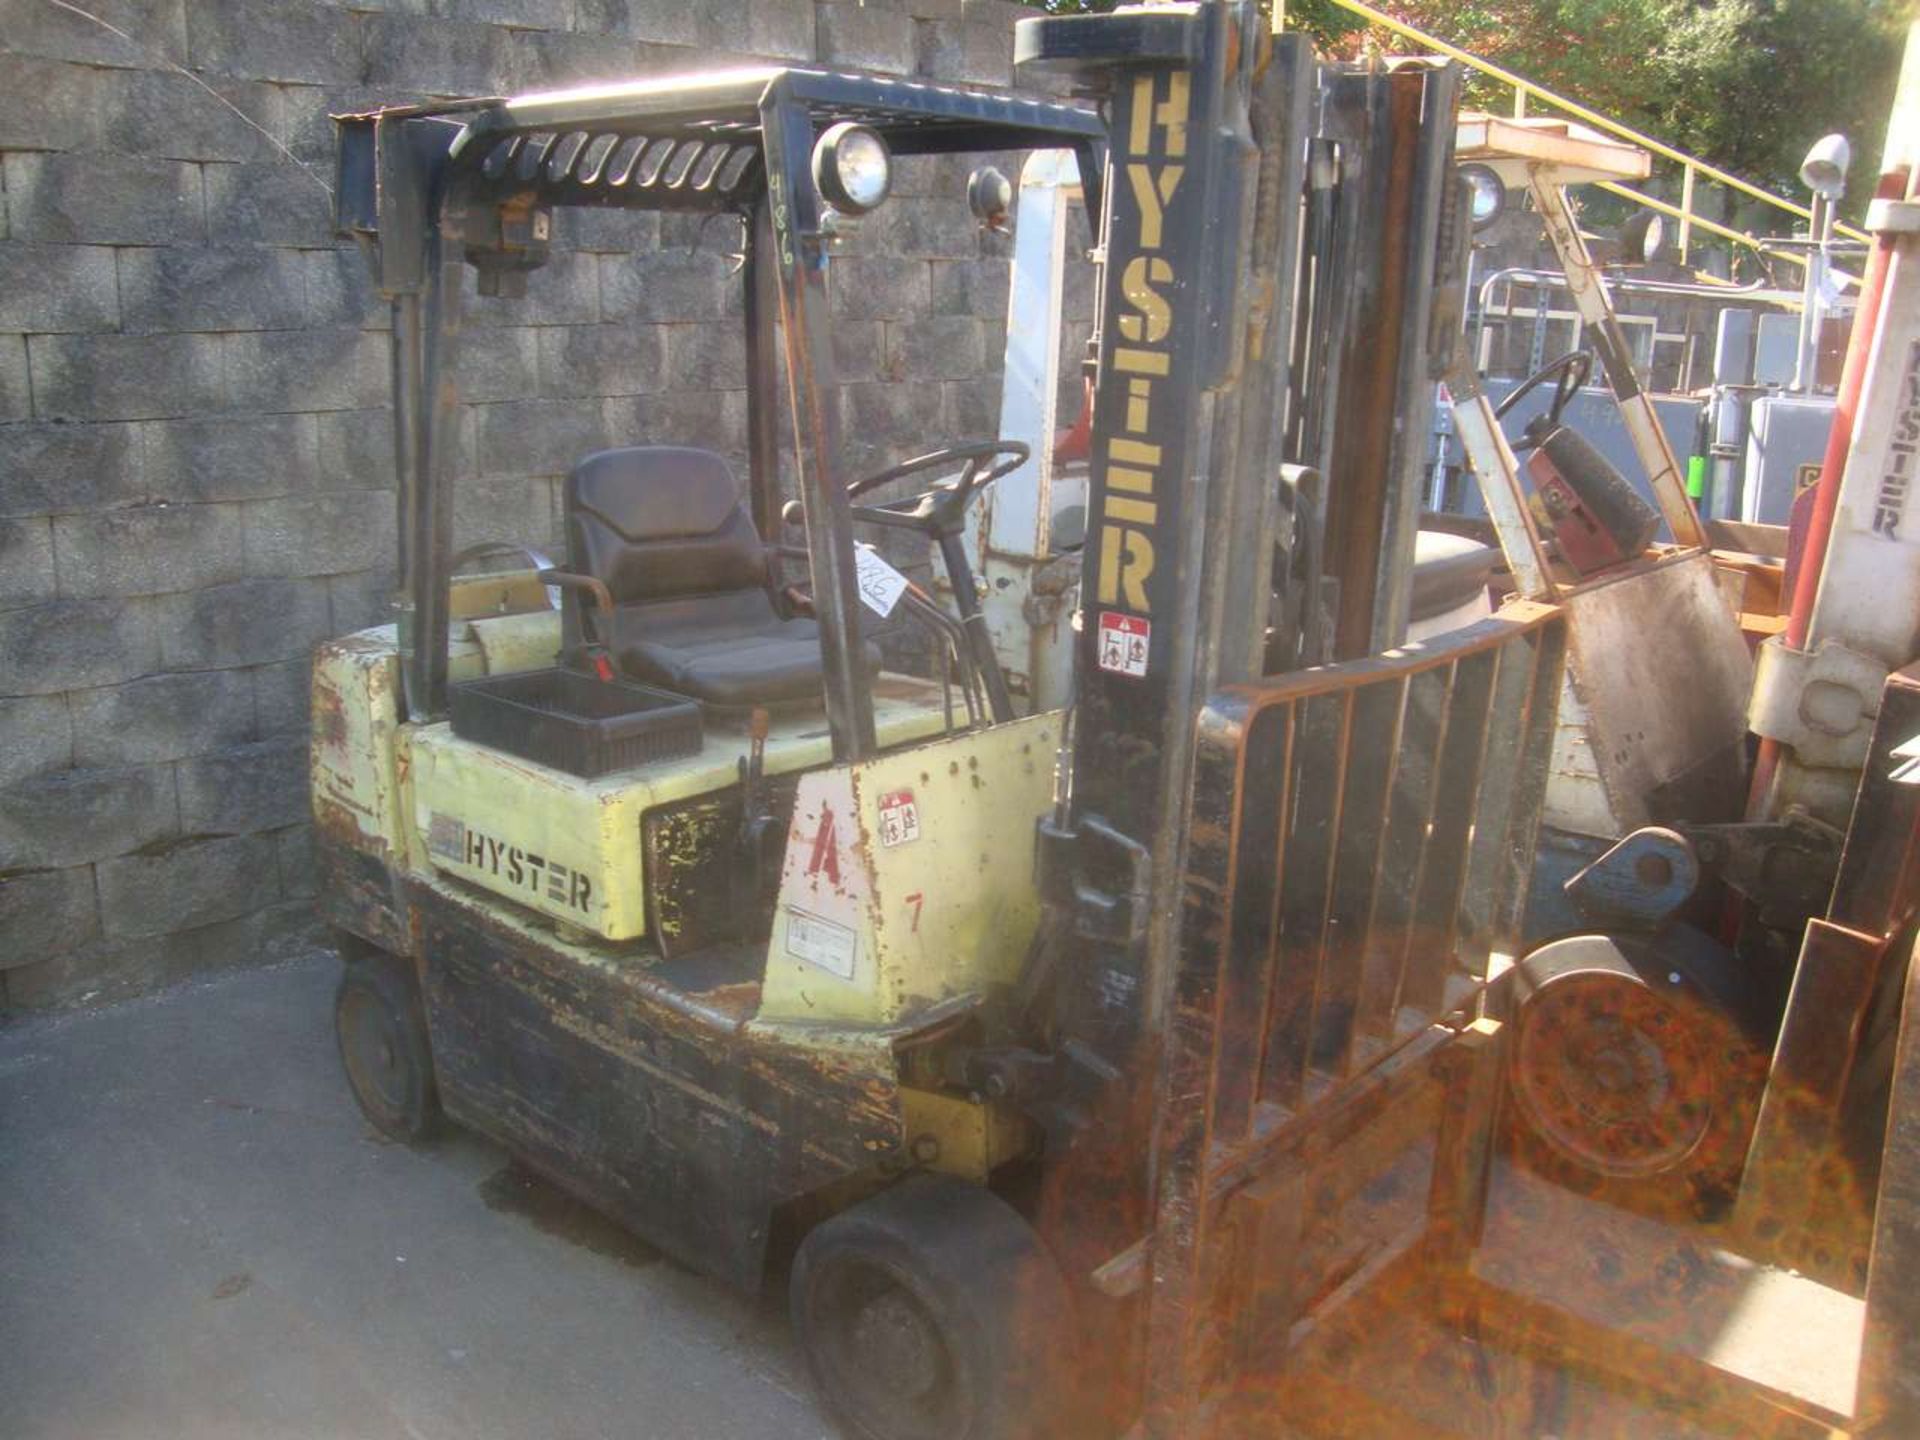 Hyster S50XL 5,000 lb Capacity forklift